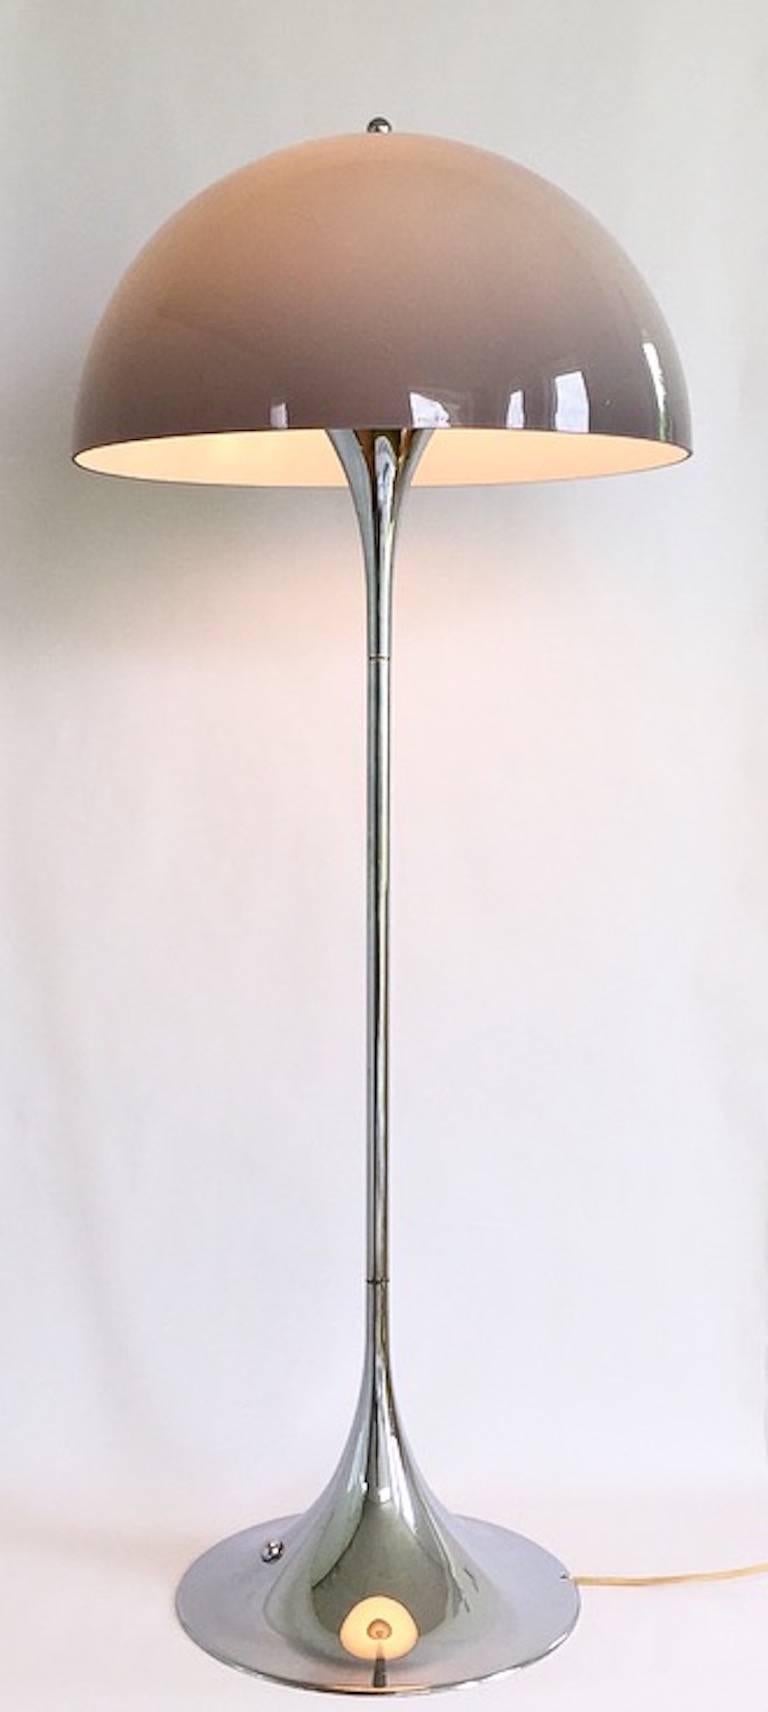 This extremely rare floor light was designed in 1971 by Space Age king Verner Panton for the Danish manufacturer Louis Poulsen.

This beautiful version has a chrome base and stem and an astonishing shade with a gradually toned grey that is lighter